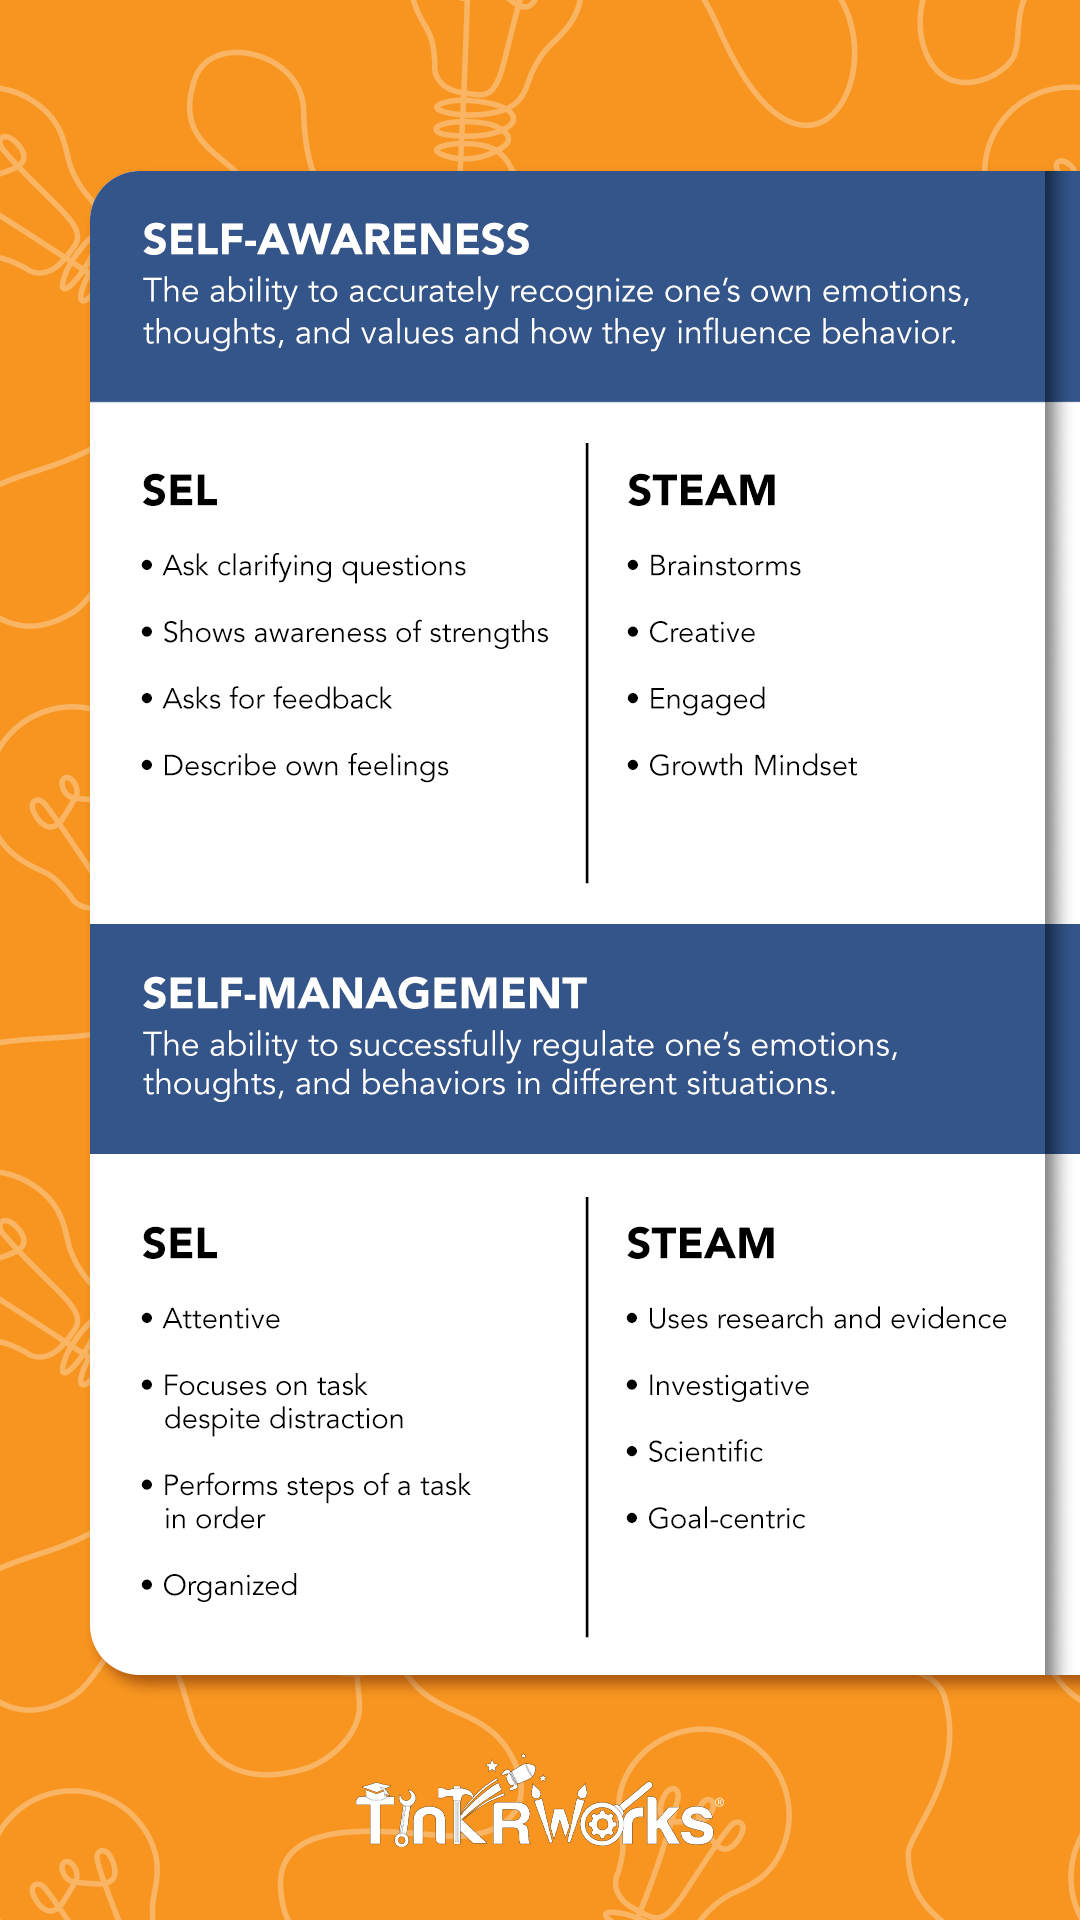 Benefits of STEAM and SEL: Self-Awareness and Self Management